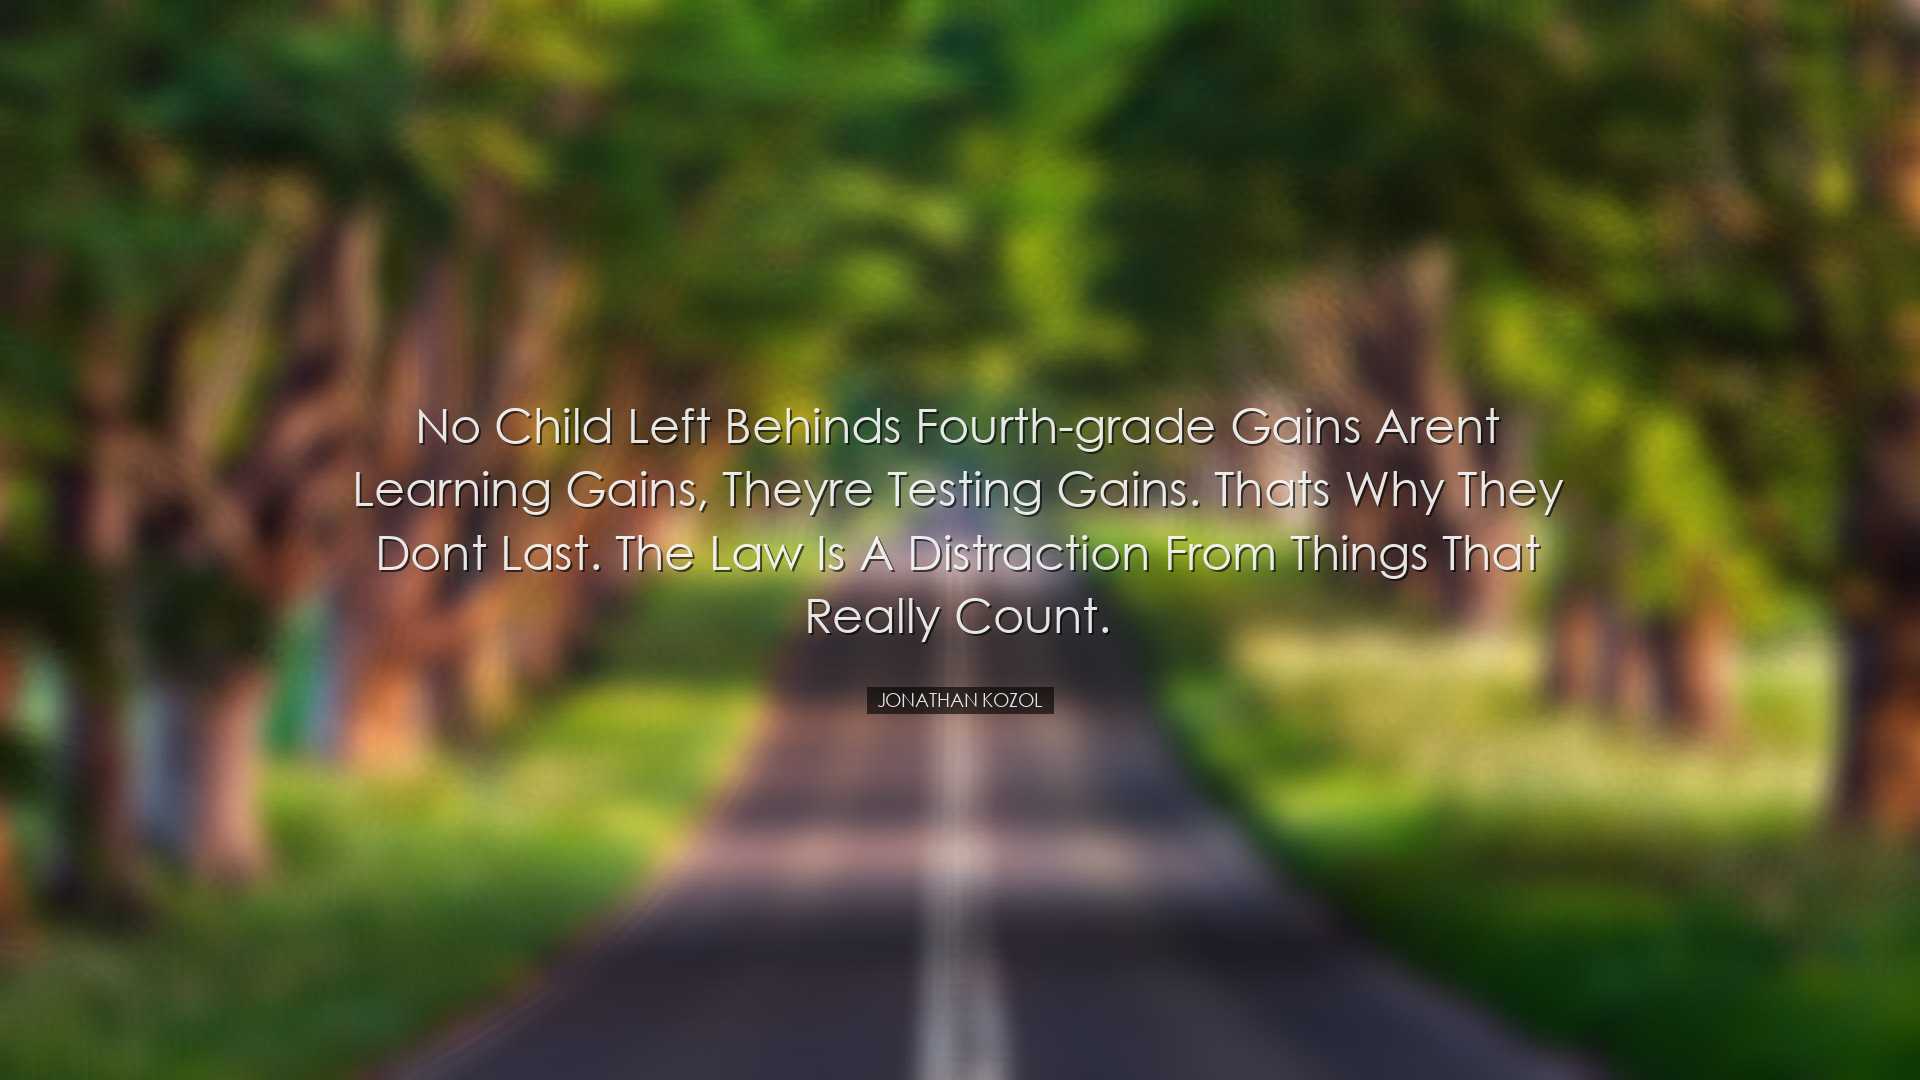 No Child Left Behinds fourth-grade gains arent learning gains, the